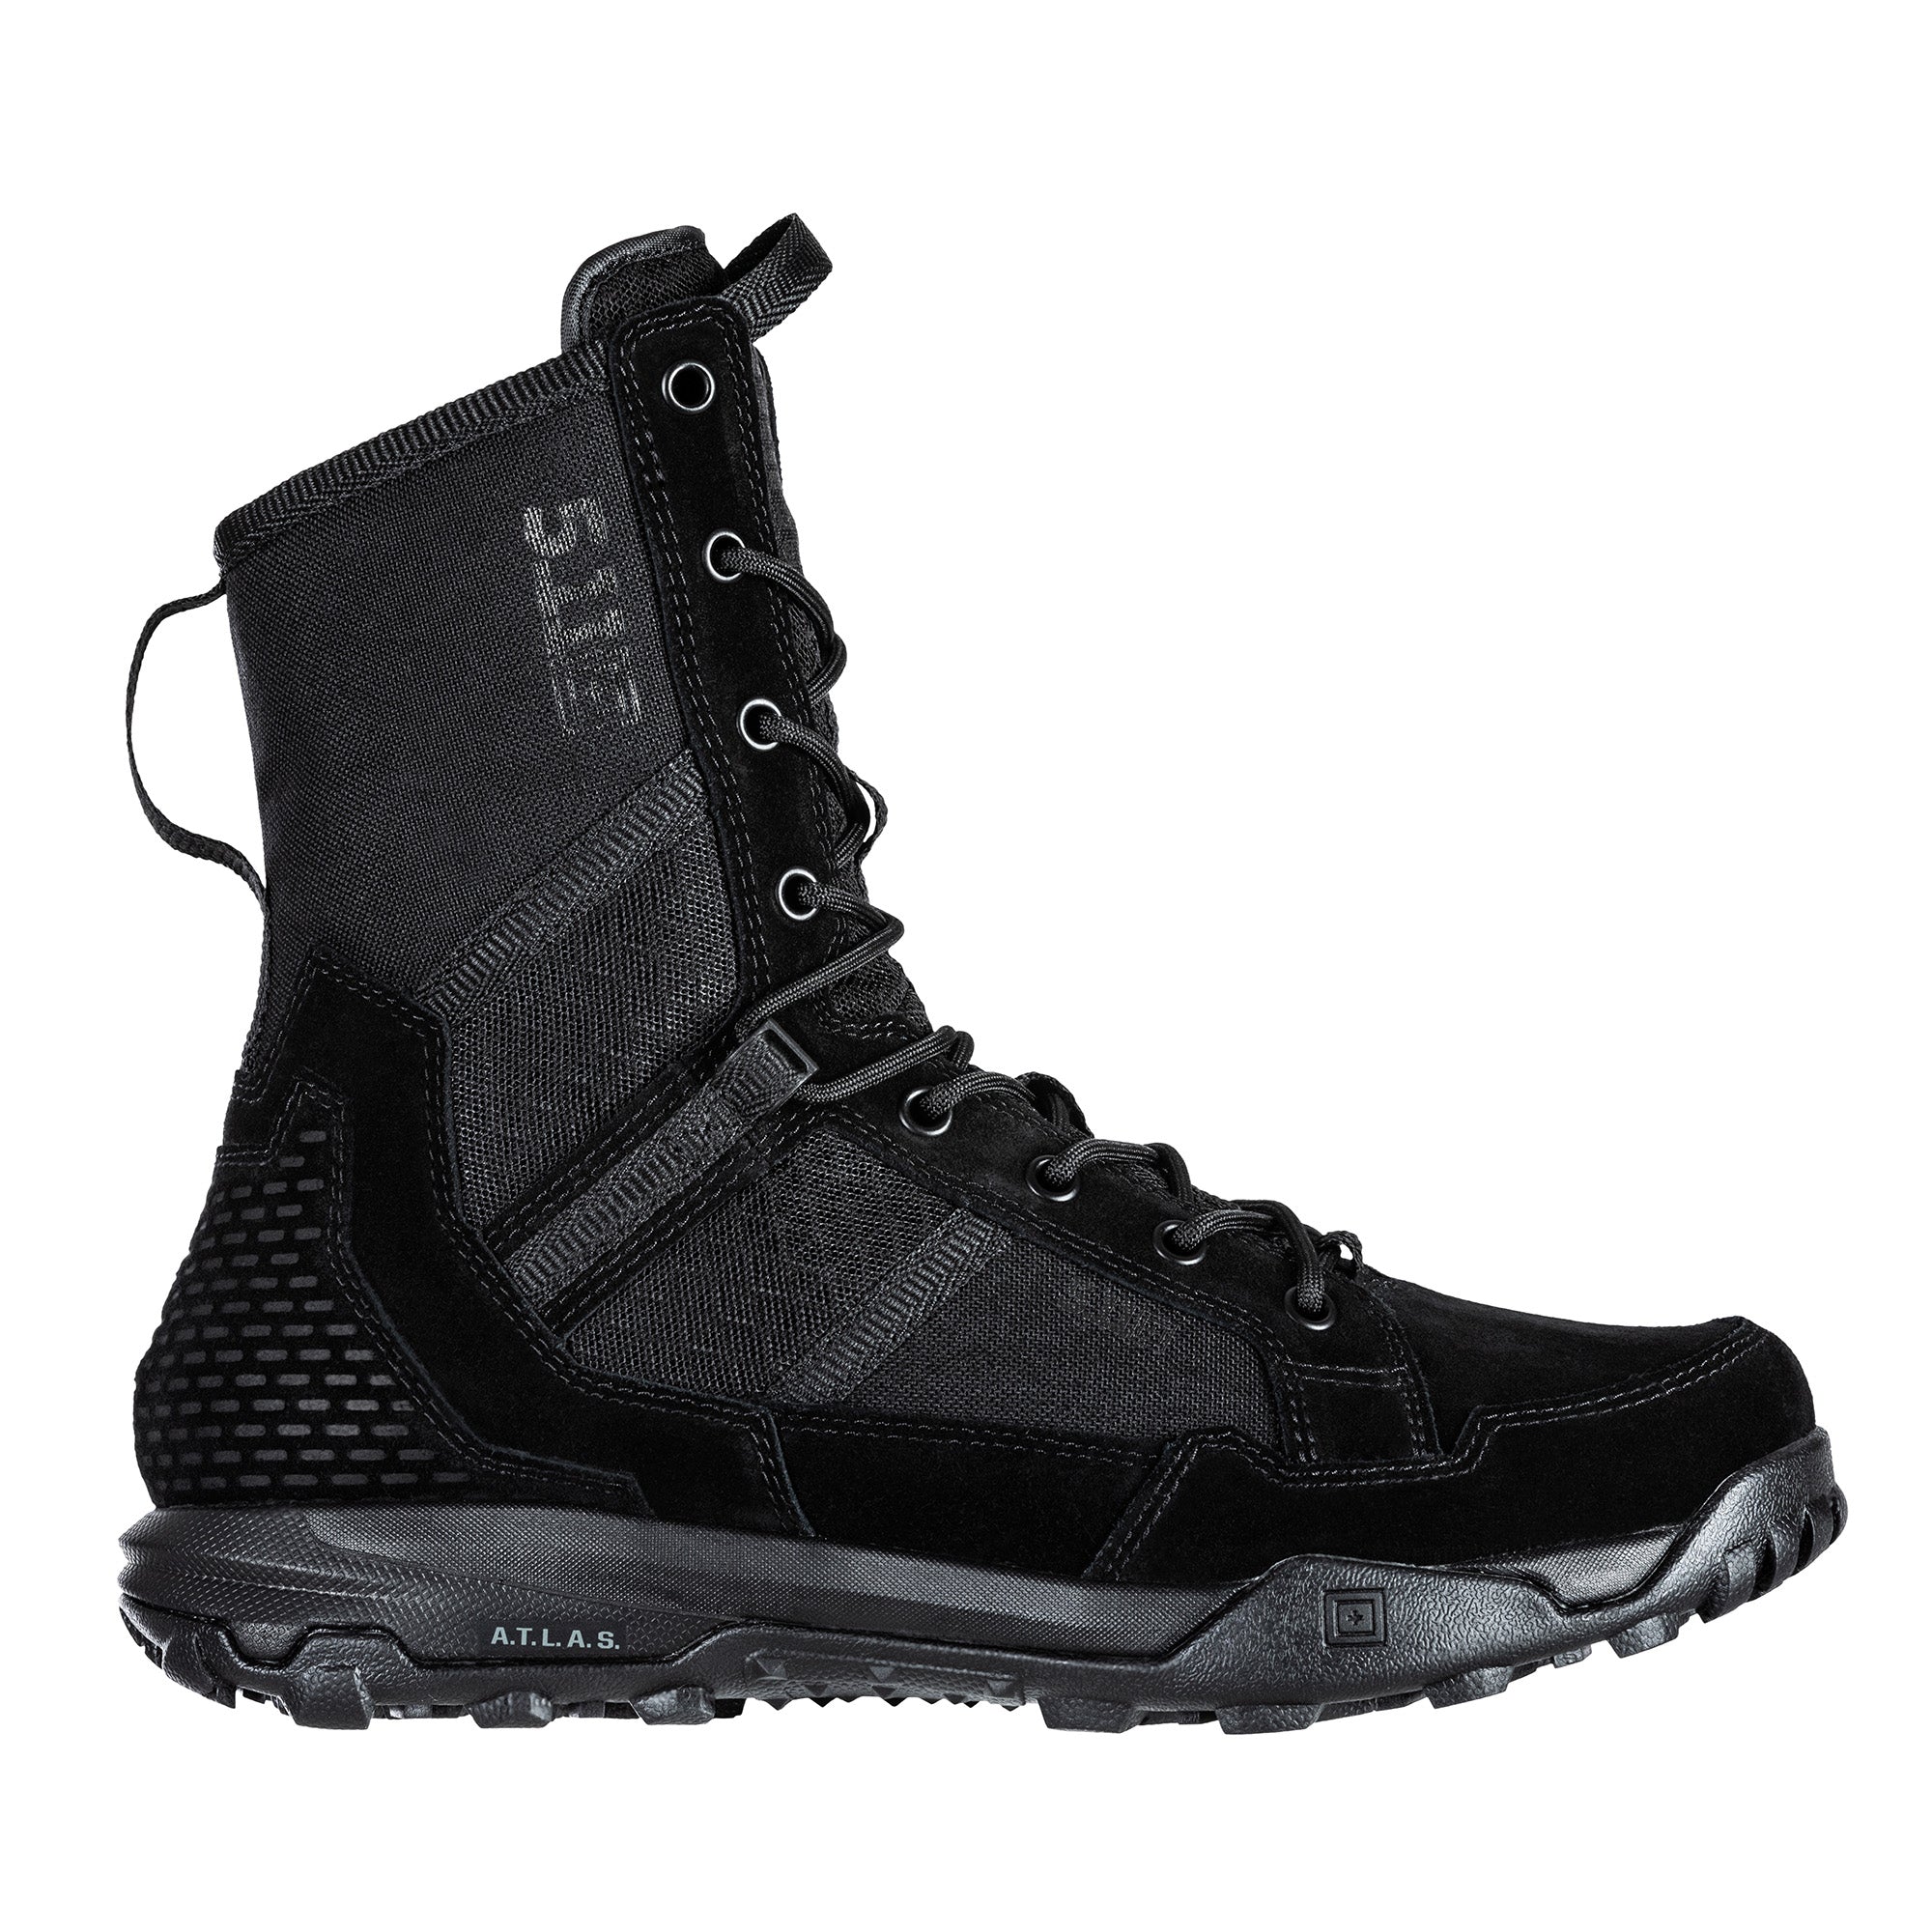 12422 A.T.L.A.S. 8" BOOT